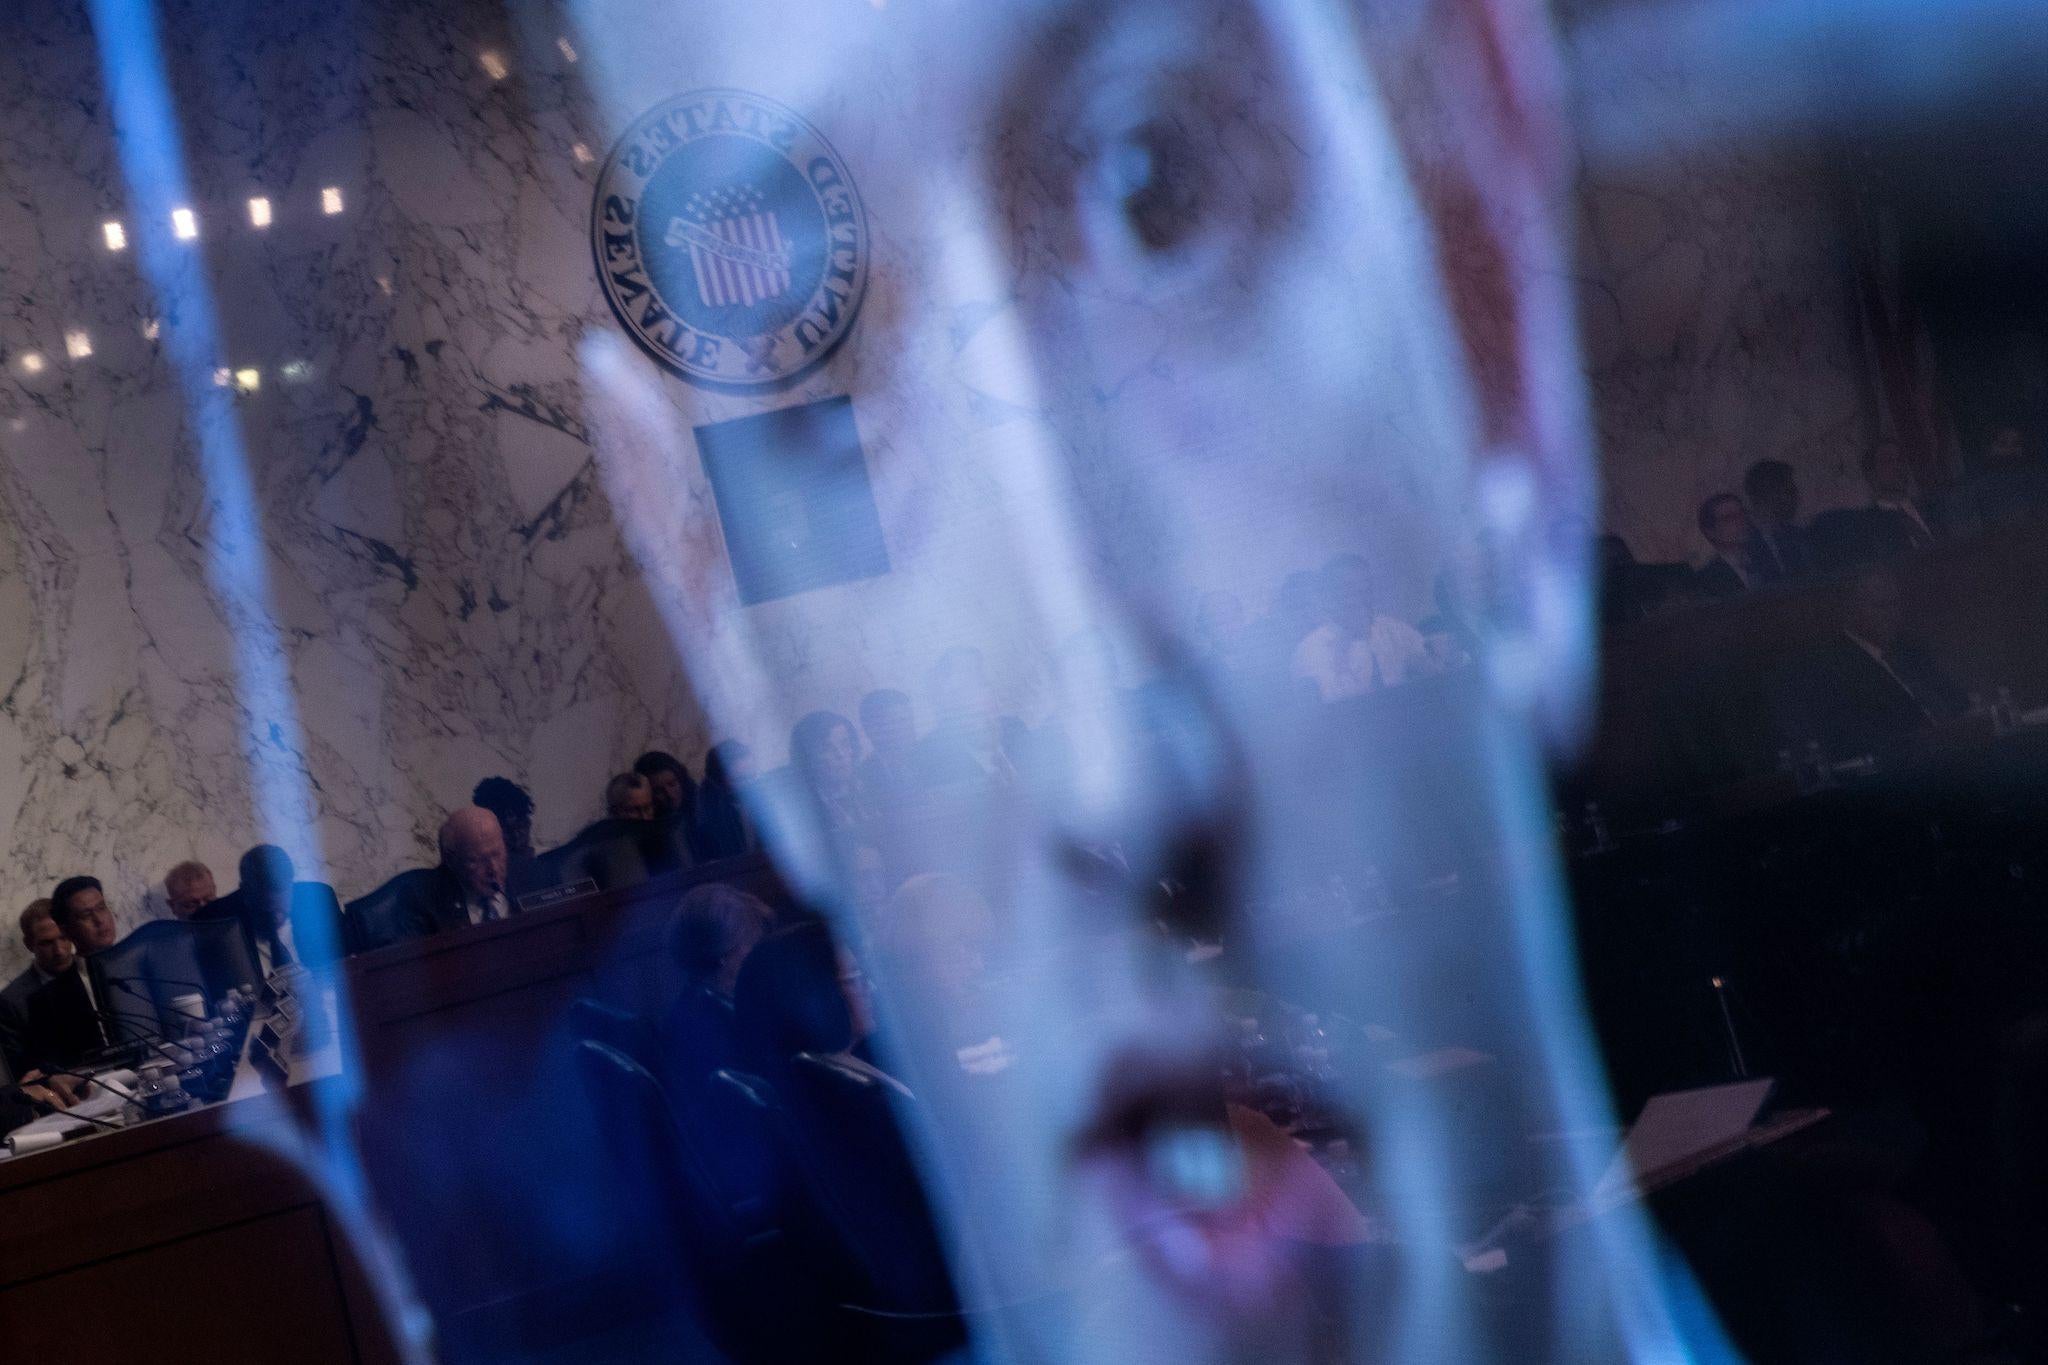 Facebook CEO Mark Zuckerberg is seen on a screen speaking during a joint hearing of the Senate Commerce, Science and Transportation Committee and Senate Judiciary Committee on Capitol Hill April 10, 2018 in Washington, DC